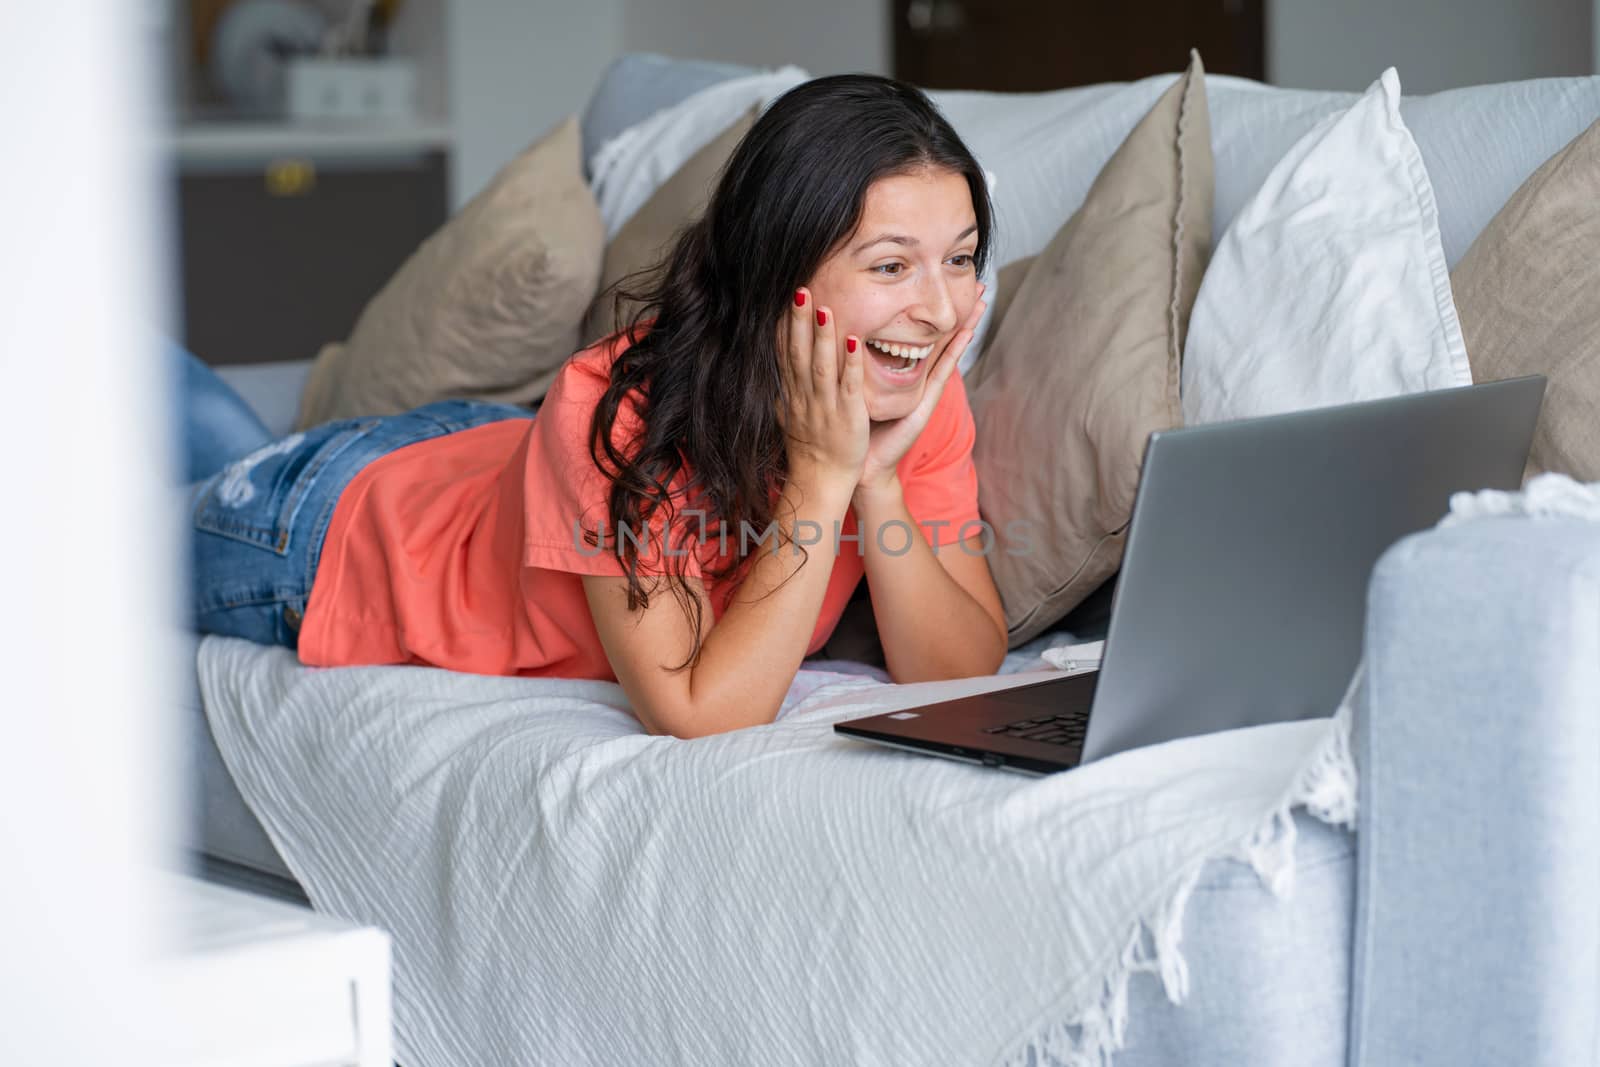 Girl lying on the couch rejoices looking at the laptop. Smiles, good mood, emotion of joy.